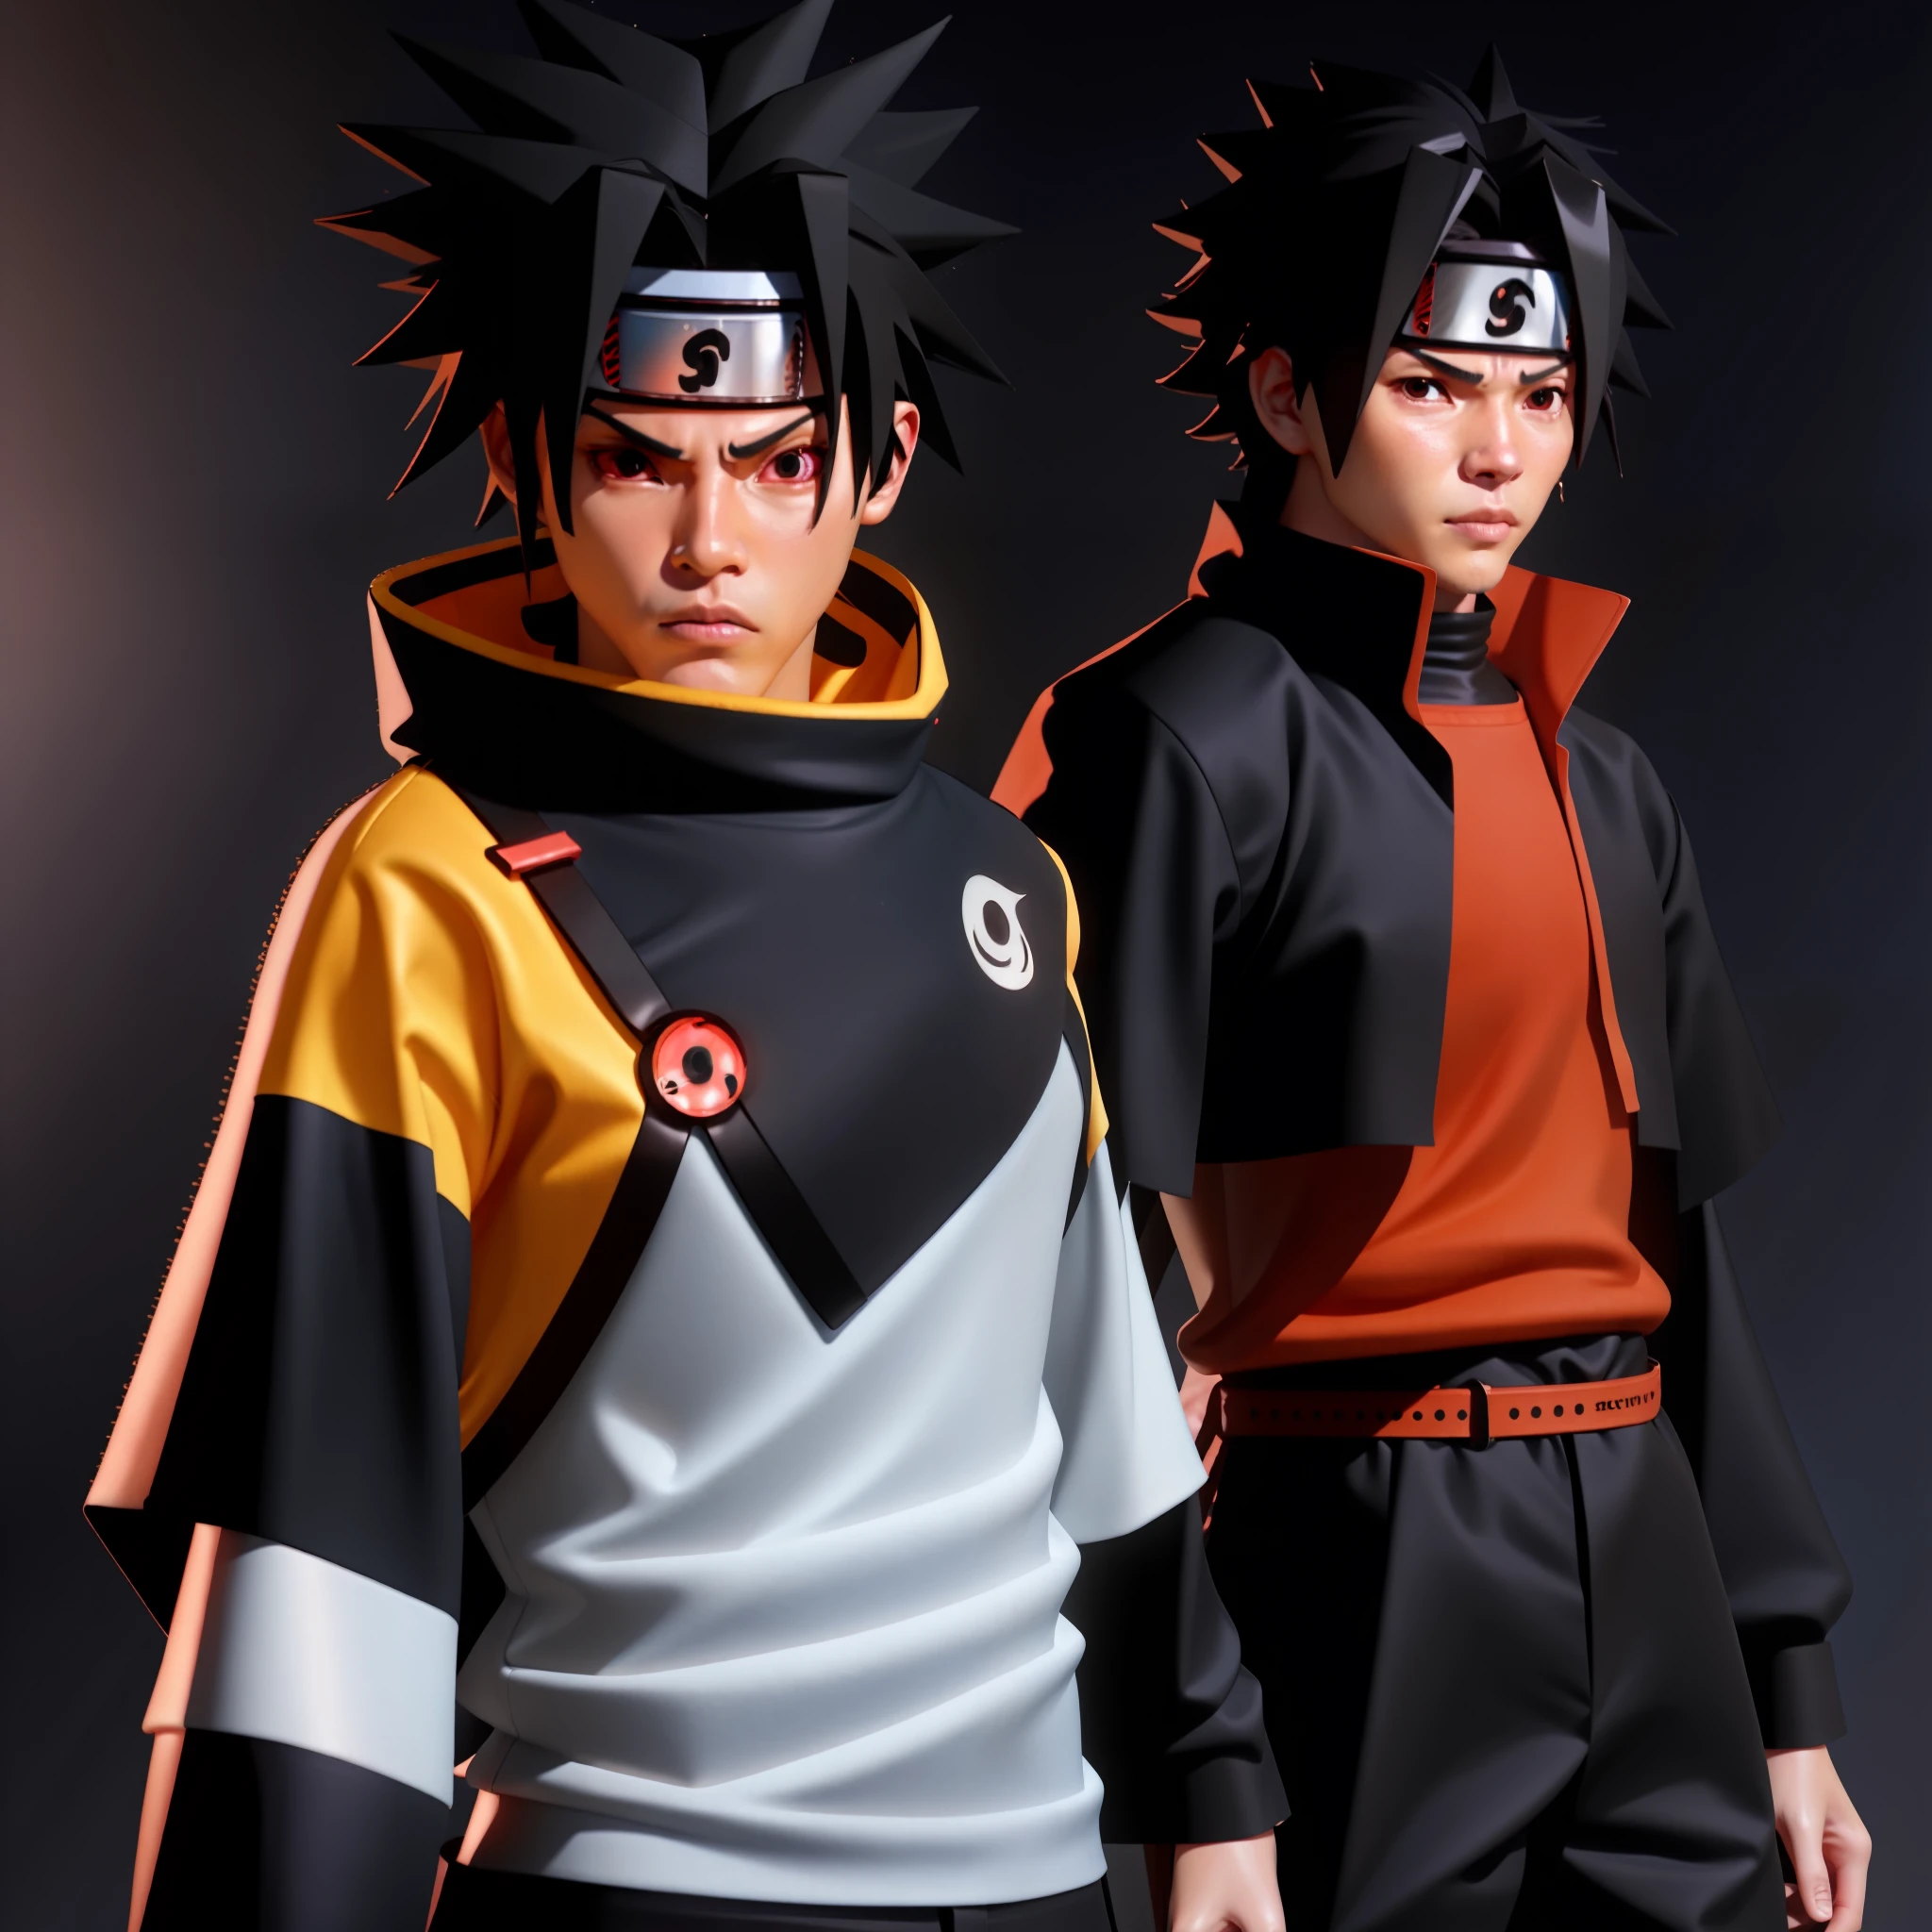 anime characters of two different colors and sizes standing next to each other, yasuke 5 0 0 px models, naruto artstyle, anime styled 3d, badass anime 8 k, anime cgi style, 3 d anime realistic, realistic anime 3 d style, anime style. 8k, sasuke uchiha, from naruto, stylized anime, anime highly detailed